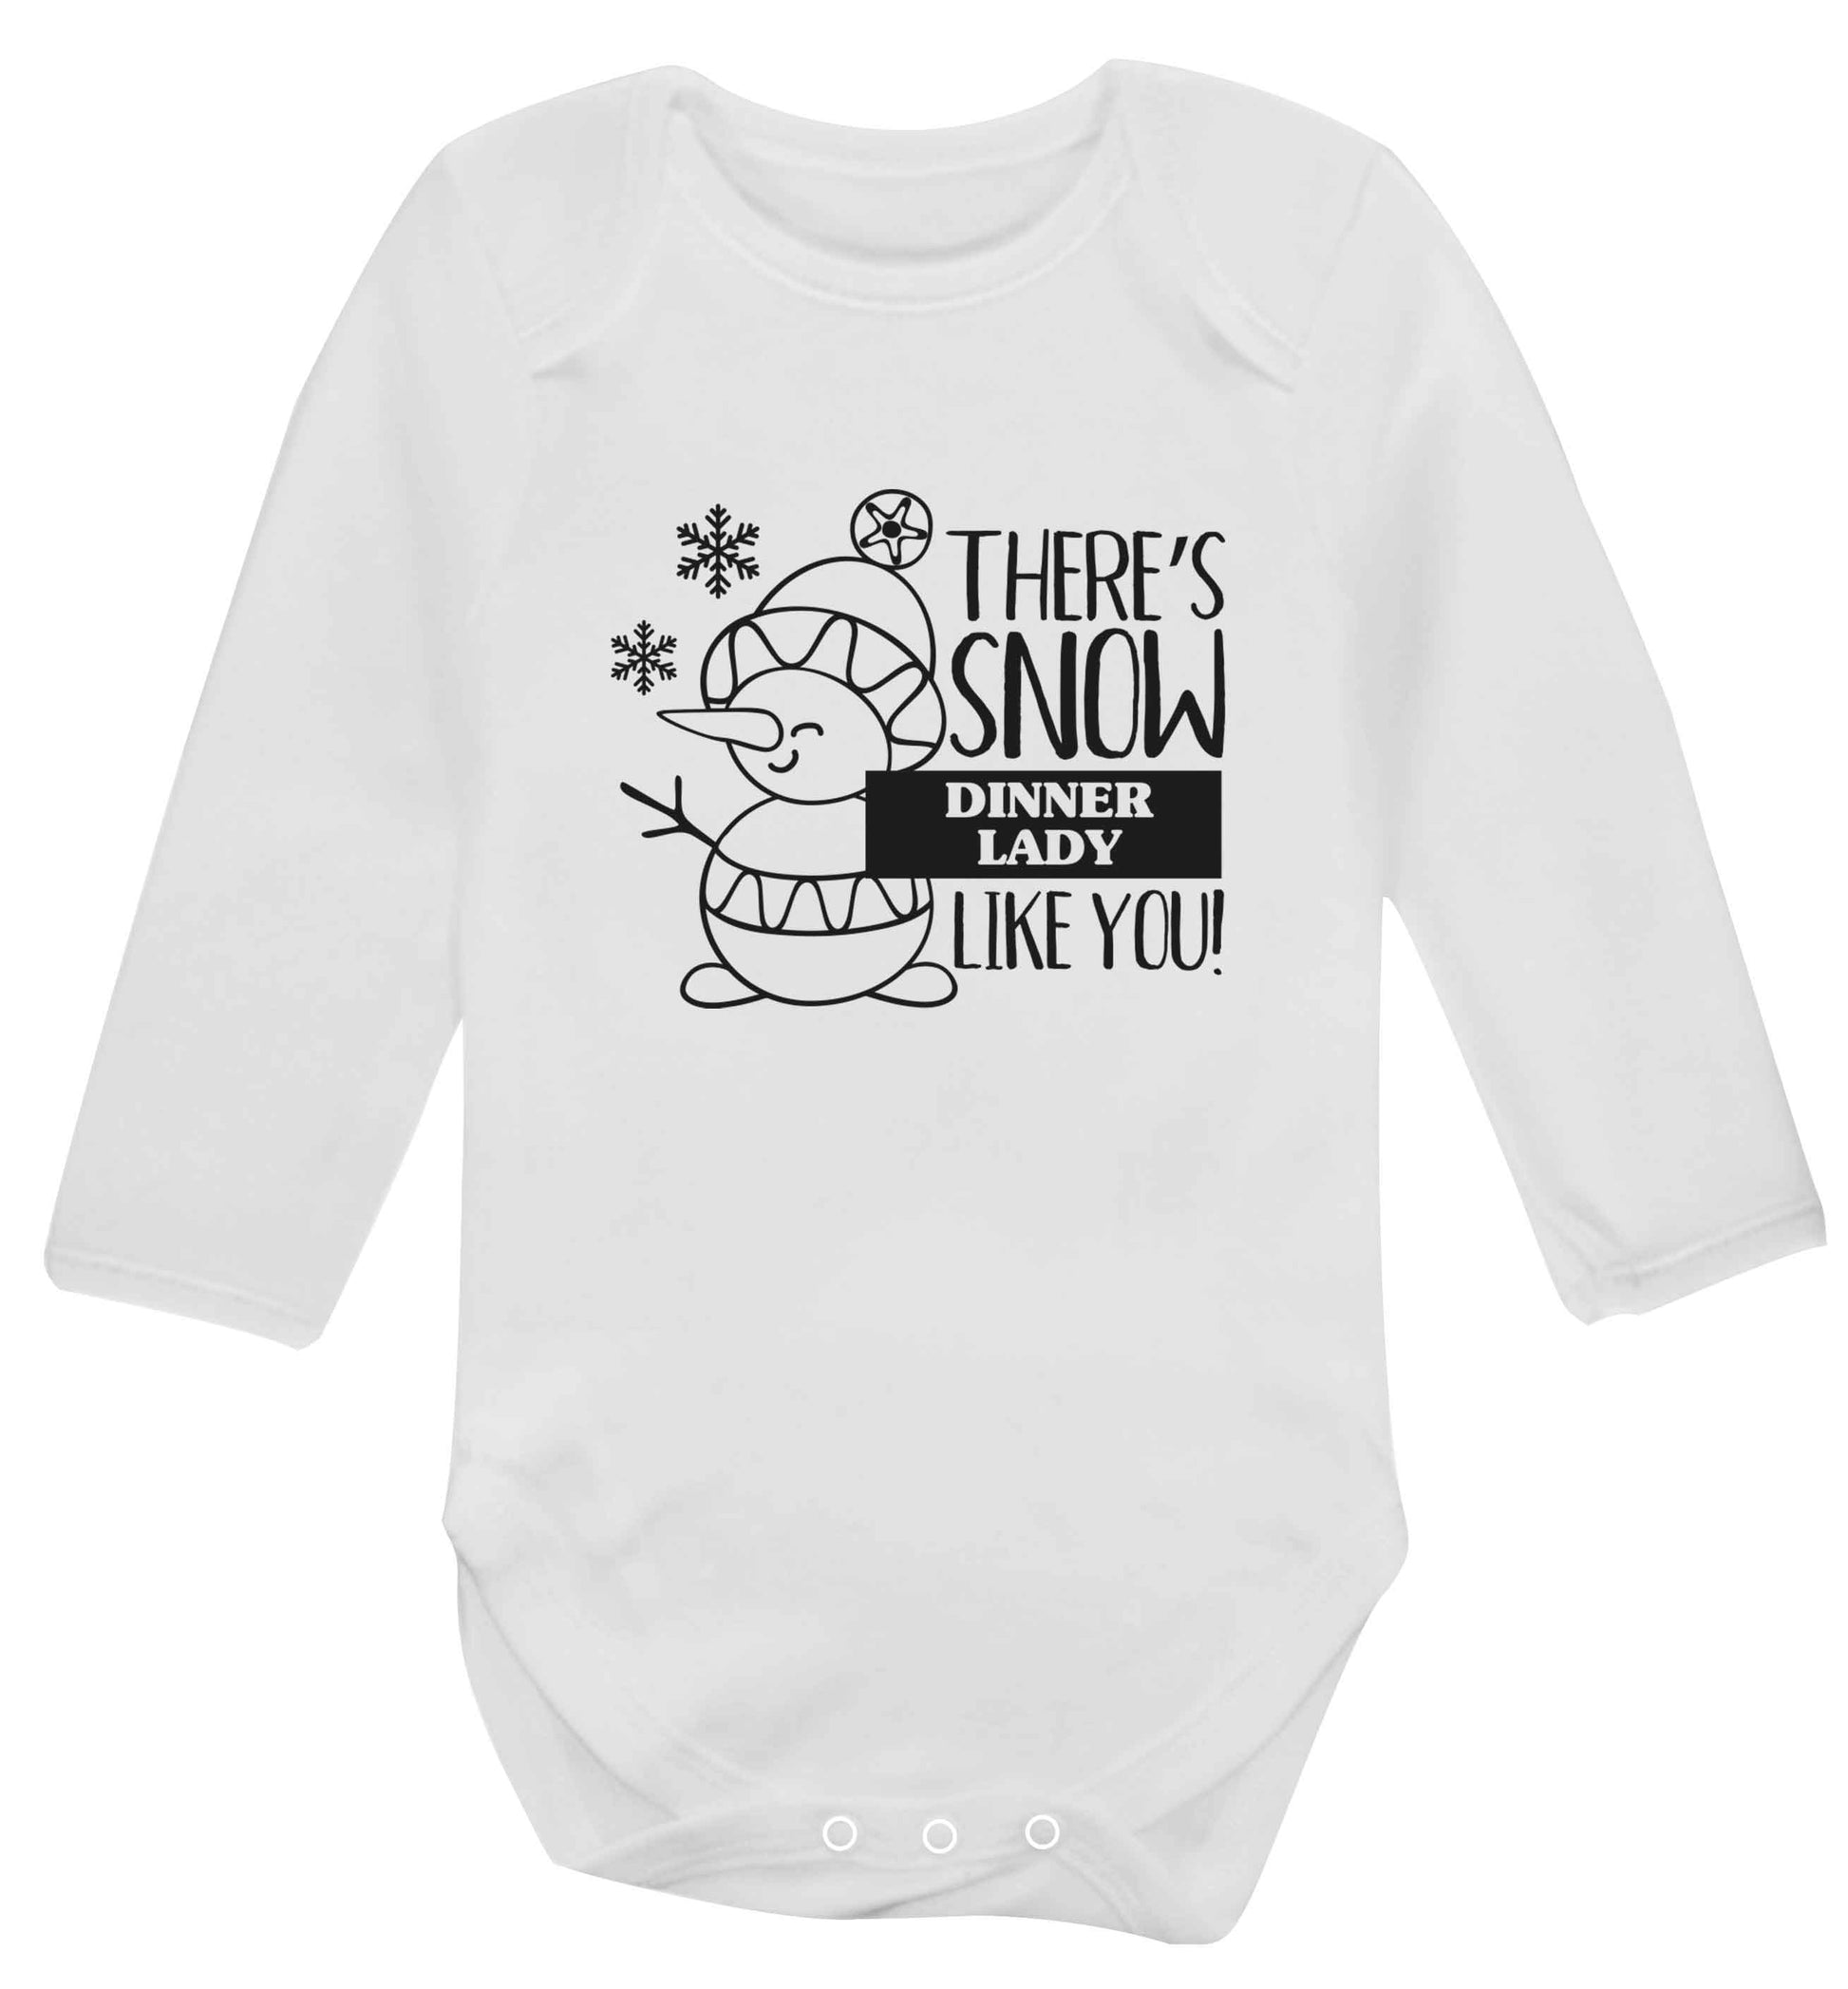 There's snow dinner lady like you baby vest long sleeved white 6-12 months